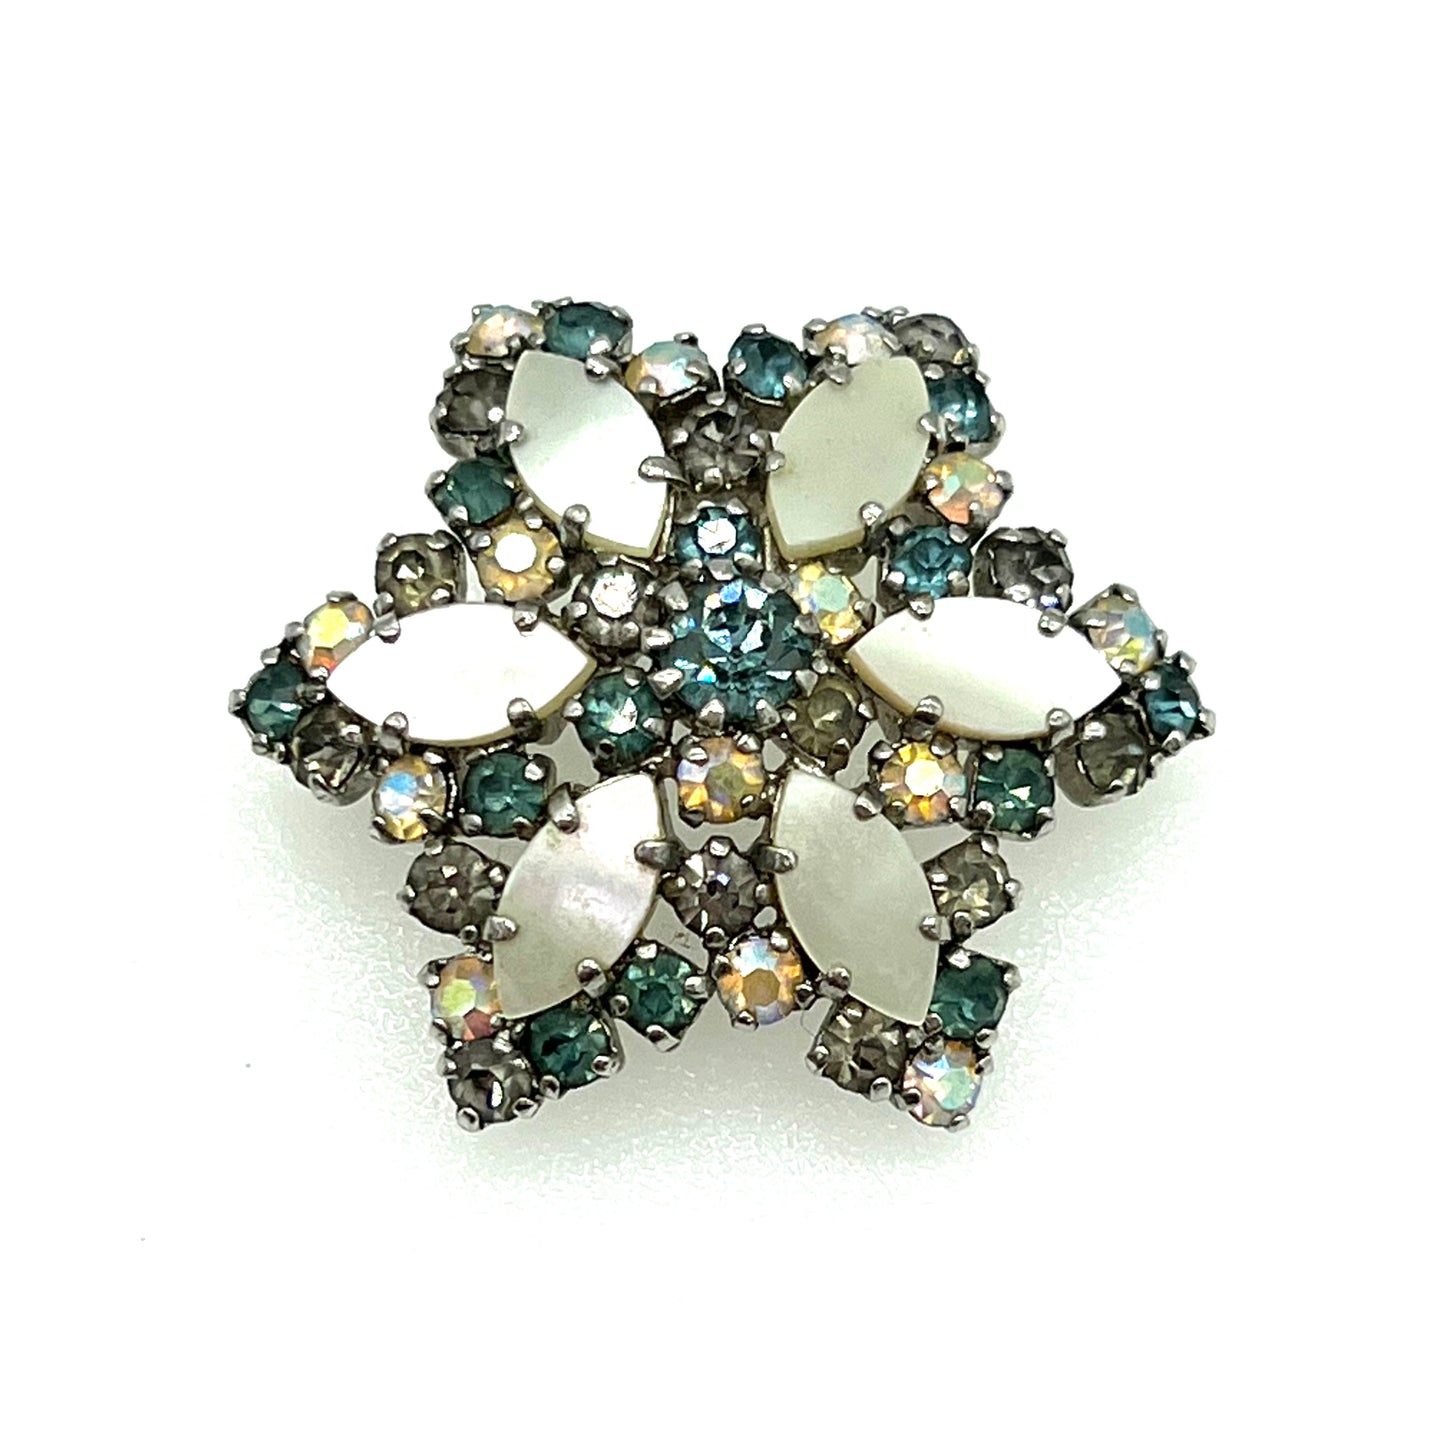 A Pretty Aurora Borealis and Mother of Pearl Brooch with Blue Rhinestones